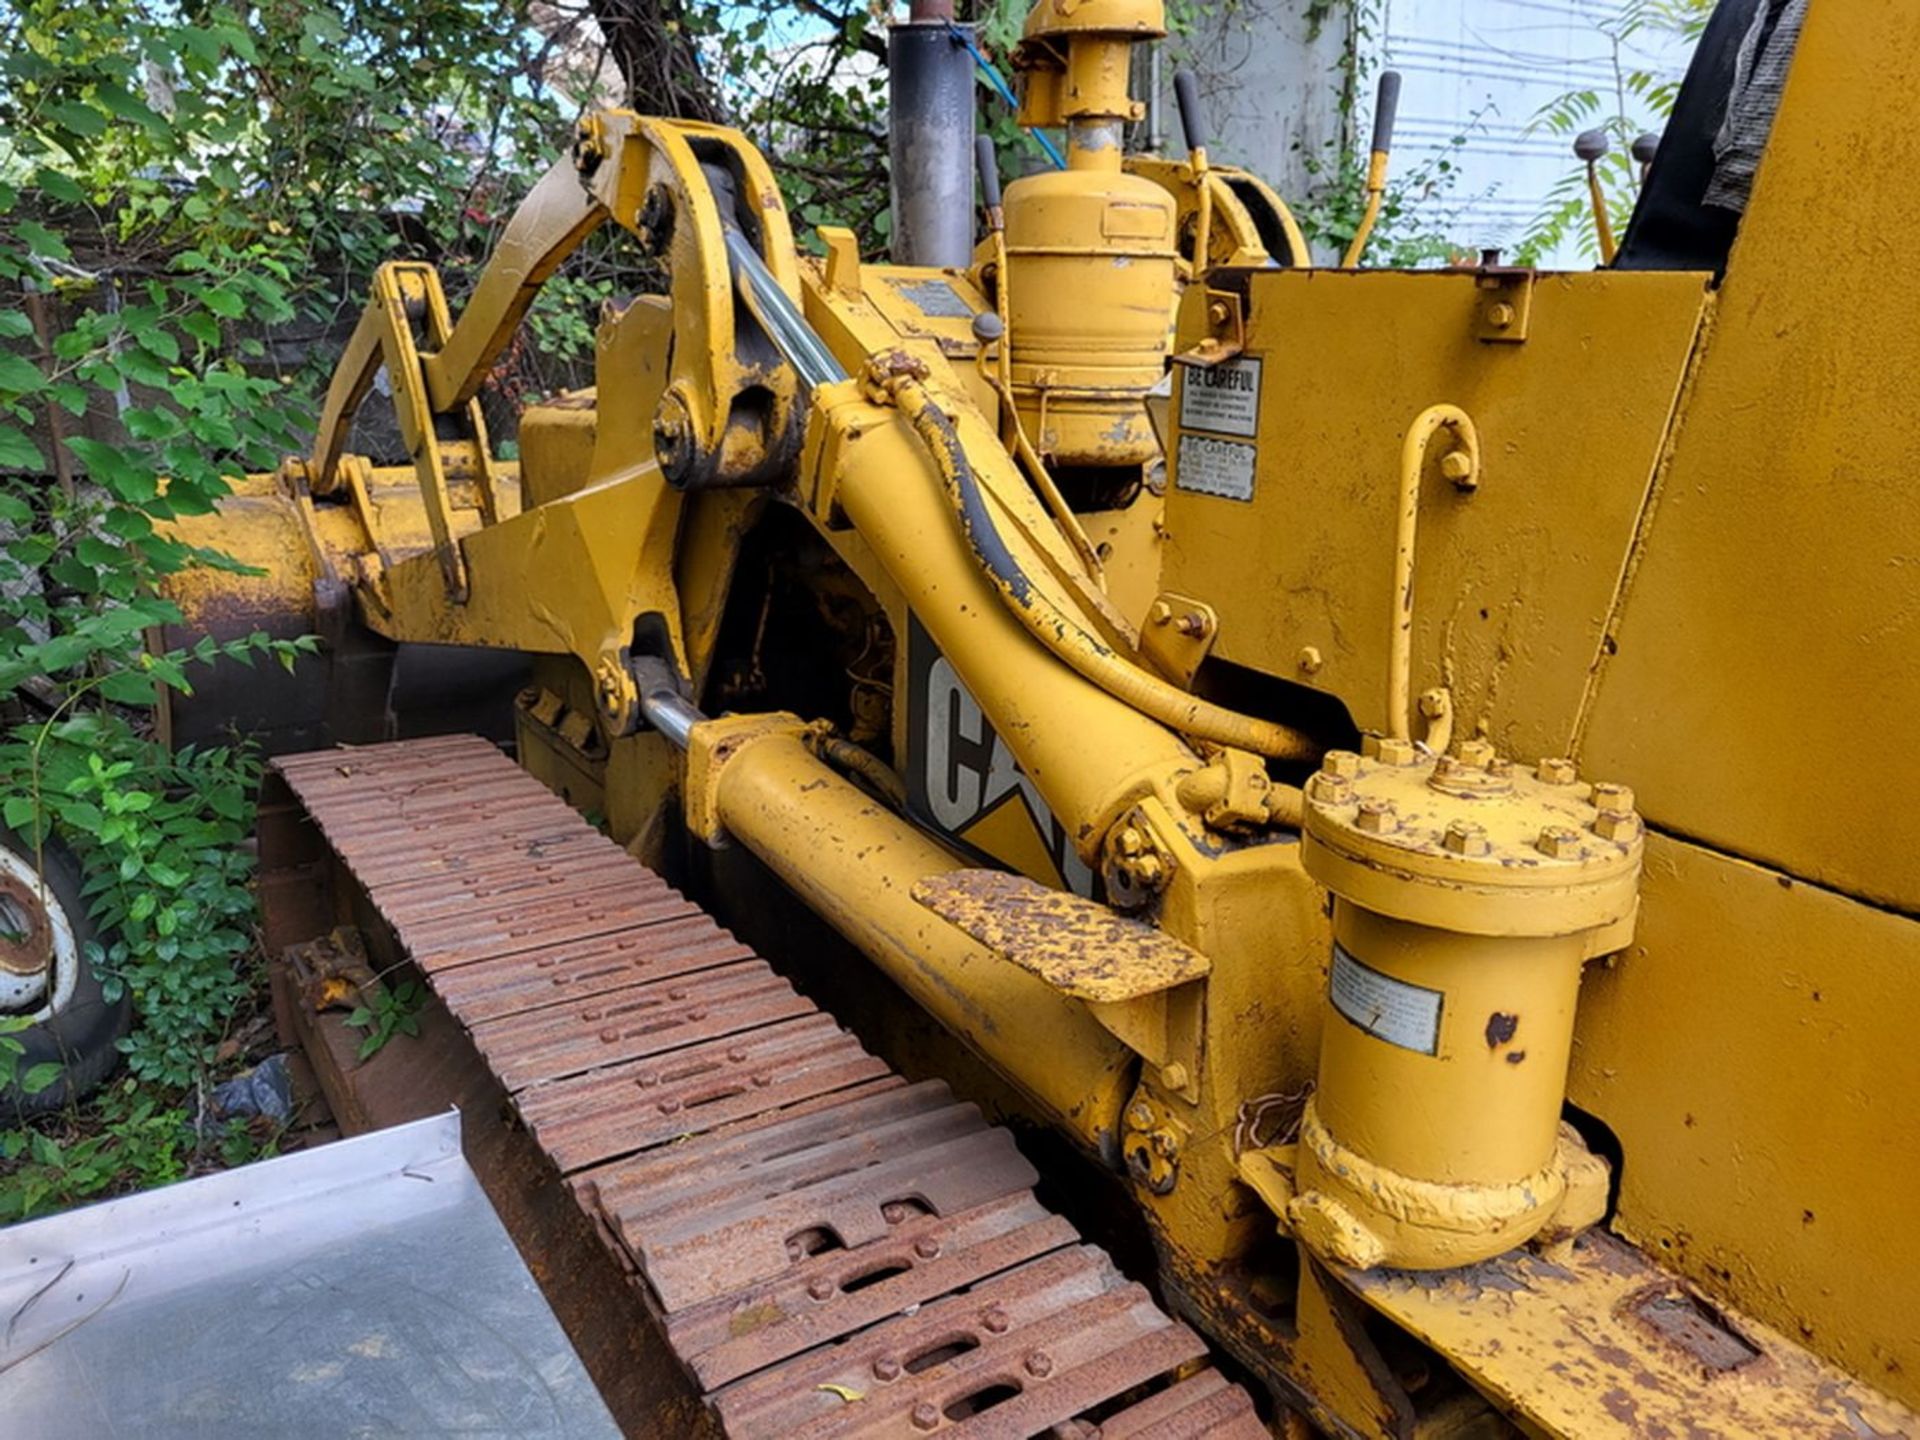 1957 Cat 955 Crawler Dozer, Adjustable Bucket (Needs Service) (Sold - Subject to Approval) - Image 4 of 8